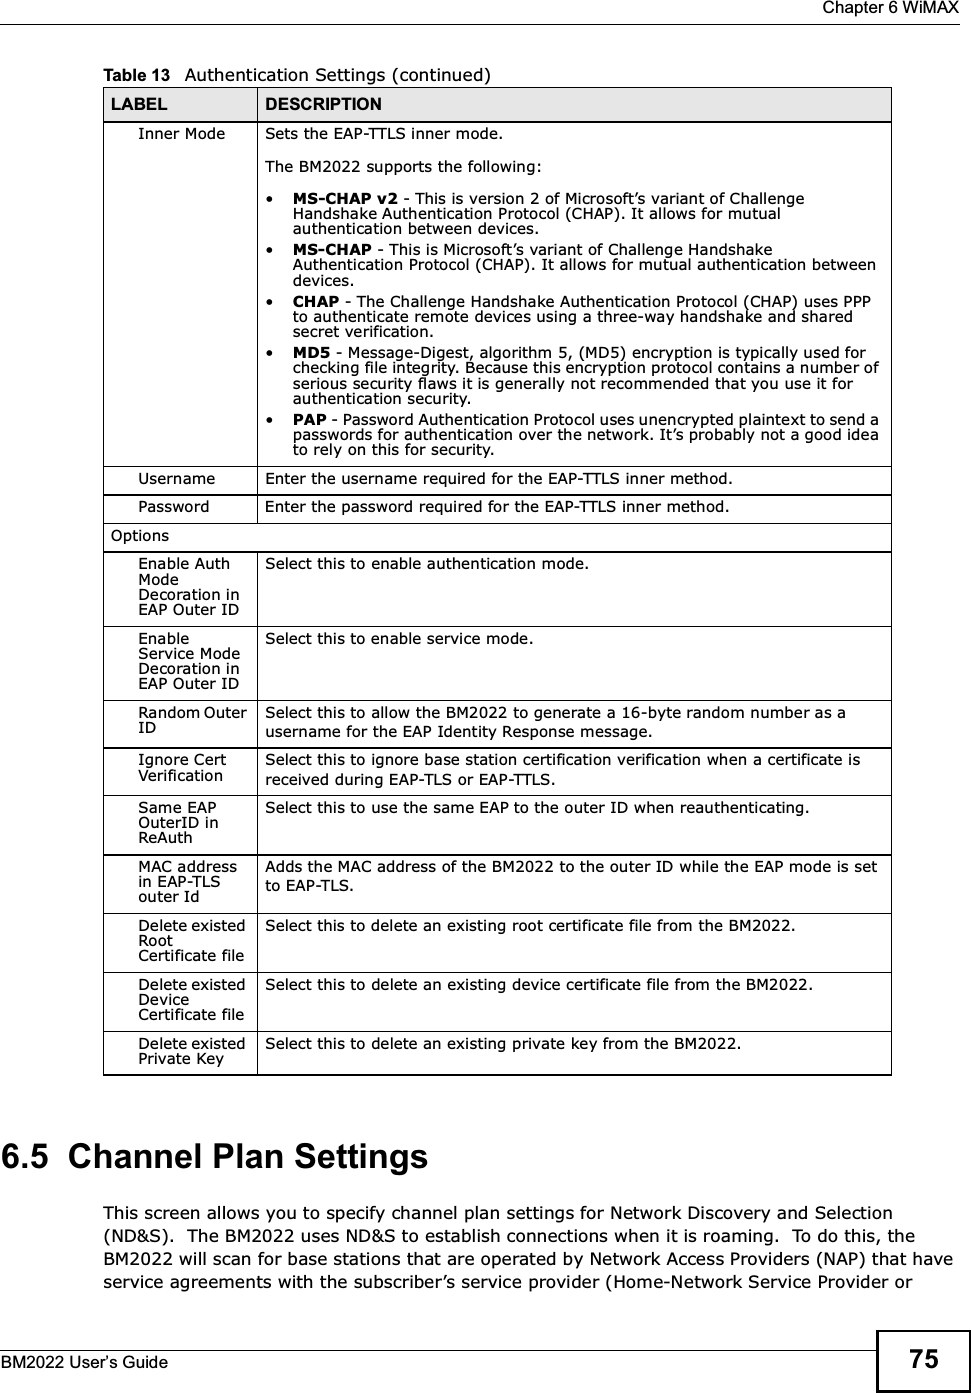  Chapter 6 WiMAXBM2022 Users Guide 756.5  Channel Plan SettingsThis screen allows you to specify channel plan settings for Network Discovery and Selection (ND&amp;S).  The BM2022 uses ND&amp;S to establish connections when it is roaming.  To do this, the BM2022 will scan for base stations that are operated by Network Access Providers (NAP) that have service agreements with the subscribers service provider (Home-Network Service Provider or Inner Mode Sets the EAP-TTLS inner mode.The BM2022 supports the following:MS-CHAP v2 - This is version 2 of Microsofts variant of Challenge Handshake Authentication Protocol (CHAP). It allows for mutual authentication between devices.MS-CHAP - This is Microsofts variant of Challenge Handshake Authentication Protocol (CHAP). It allows for mutual authentication between devices.CHAP - The Challenge Handshake Authentication Protocol (CHAP) uses PPP to authenticate remote devices using a three-way handshake and shared secret verification.MD5 - Message-Digest, algorithm 5, (MD5) encryption is typically used for checking file integrity. Because this encryption protocol contains a number of serious security flaws it is generally not recommended that you use it for authentication security.PAP - Password Authentication Protocol uses unencrypted plaintext to send a passwords for authentication over the network. Its probably not a good idea to rely on this for security.Username Enter the username required for the EAP-TTLS inner method.Password Enter the password required for the EAP-TTLS inner method.OptionsEnable Auth Mode Decoration in EAP Outer IDSelect this to enable authentication mode.Enable Service Mode Decoration in EAP Outer IDSelect this to enable service mode.Random Outer IDSelect this to allow the BM2022 to generate a 16-byte random number as a username for the EAP Identity Response message.Ignore Cert VerificationSelect this to ignore base station certification verification when a certificate is received during EAP-TLS or EAP-TTLS.Same EAP OuterID in ReAuthSelect this to use the same EAP to the outer ID when reauthenticating.MAC address in EAP-TLS outer IdAdds the MAC address of the BM2022 to the outer ID while the EAP mode is set to EAP-TLS.Delete existed Root Certificate fileSelect this to delete an existing root certificate file from the BM2022.Delete existed Device Certificate fileSelect this to delete an existing device certificate file from the BM2022.Delete existed Private KeySelect this to delete an existing private key from the BM2022.Table 13   Authentication Settings (continued)LABEL DESCRIPTION